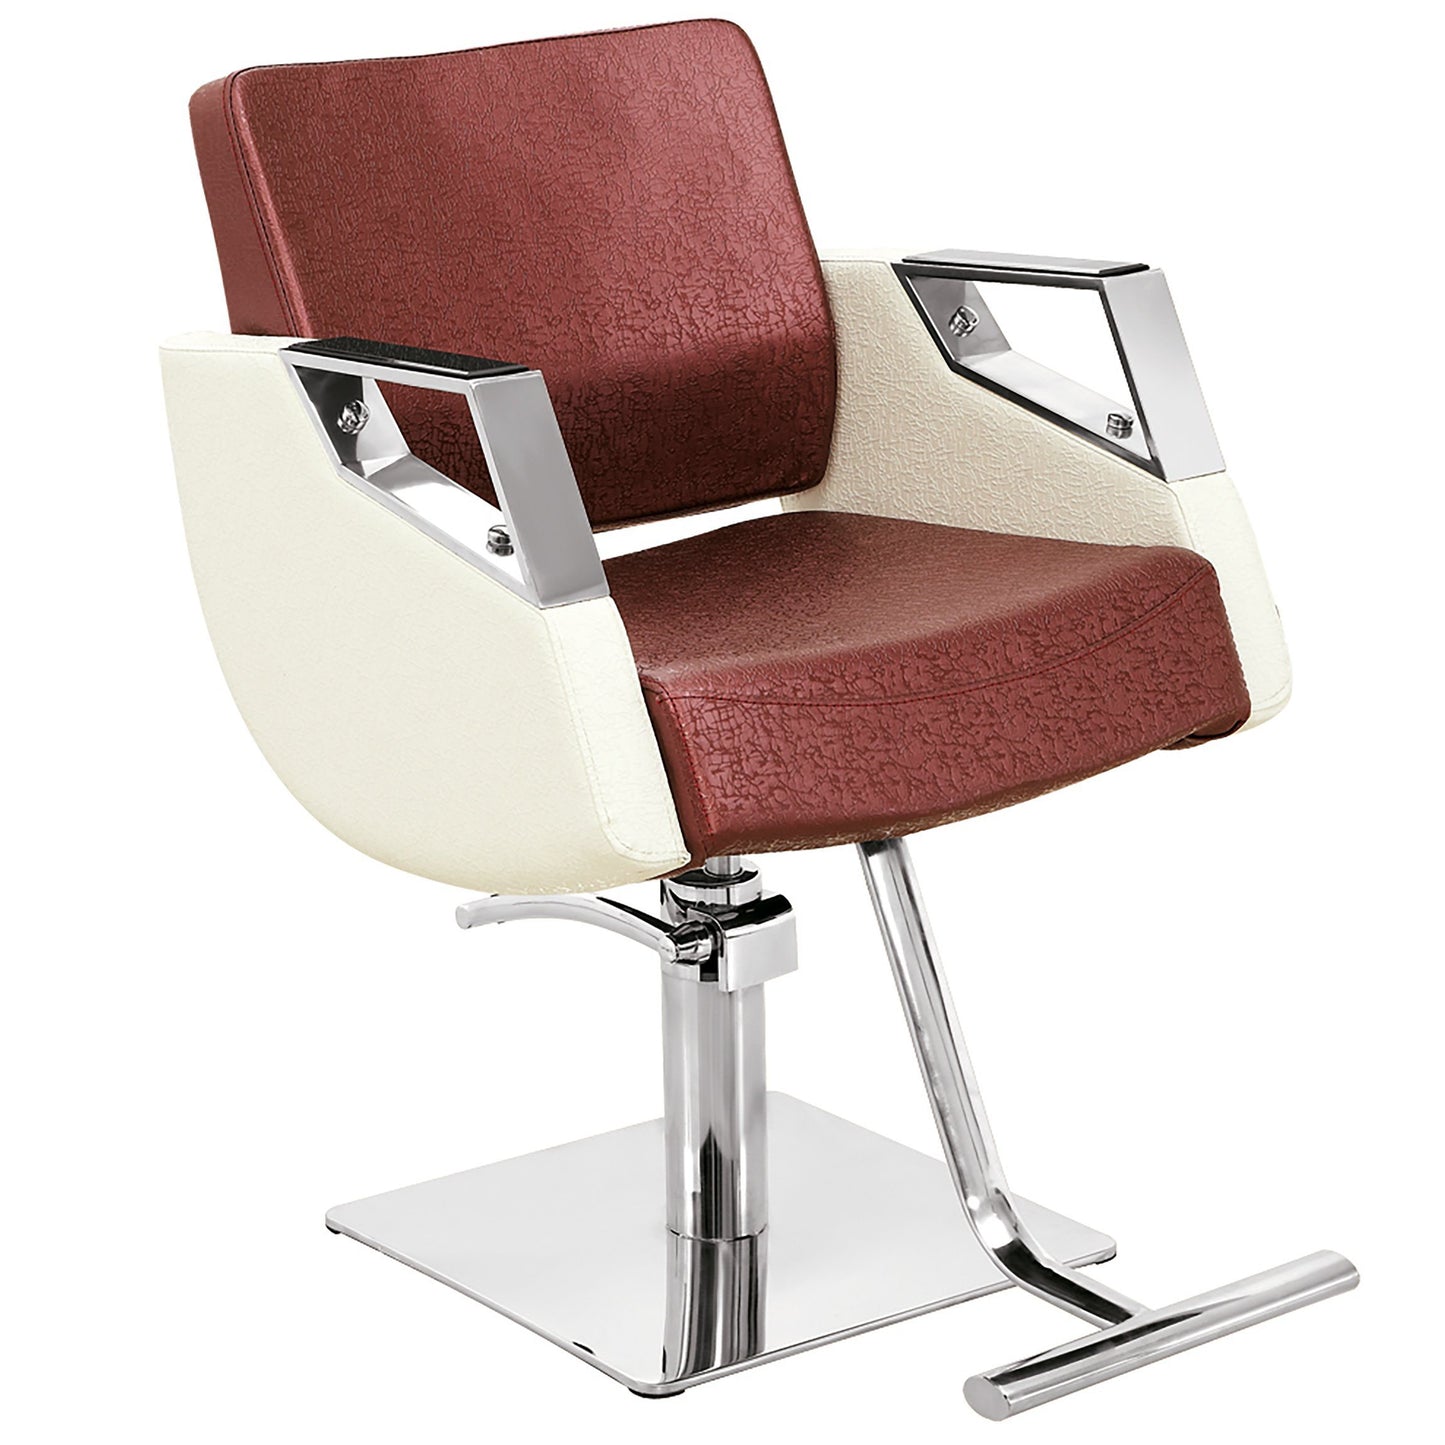 M-2216 STYLING CHAIRS SSW 